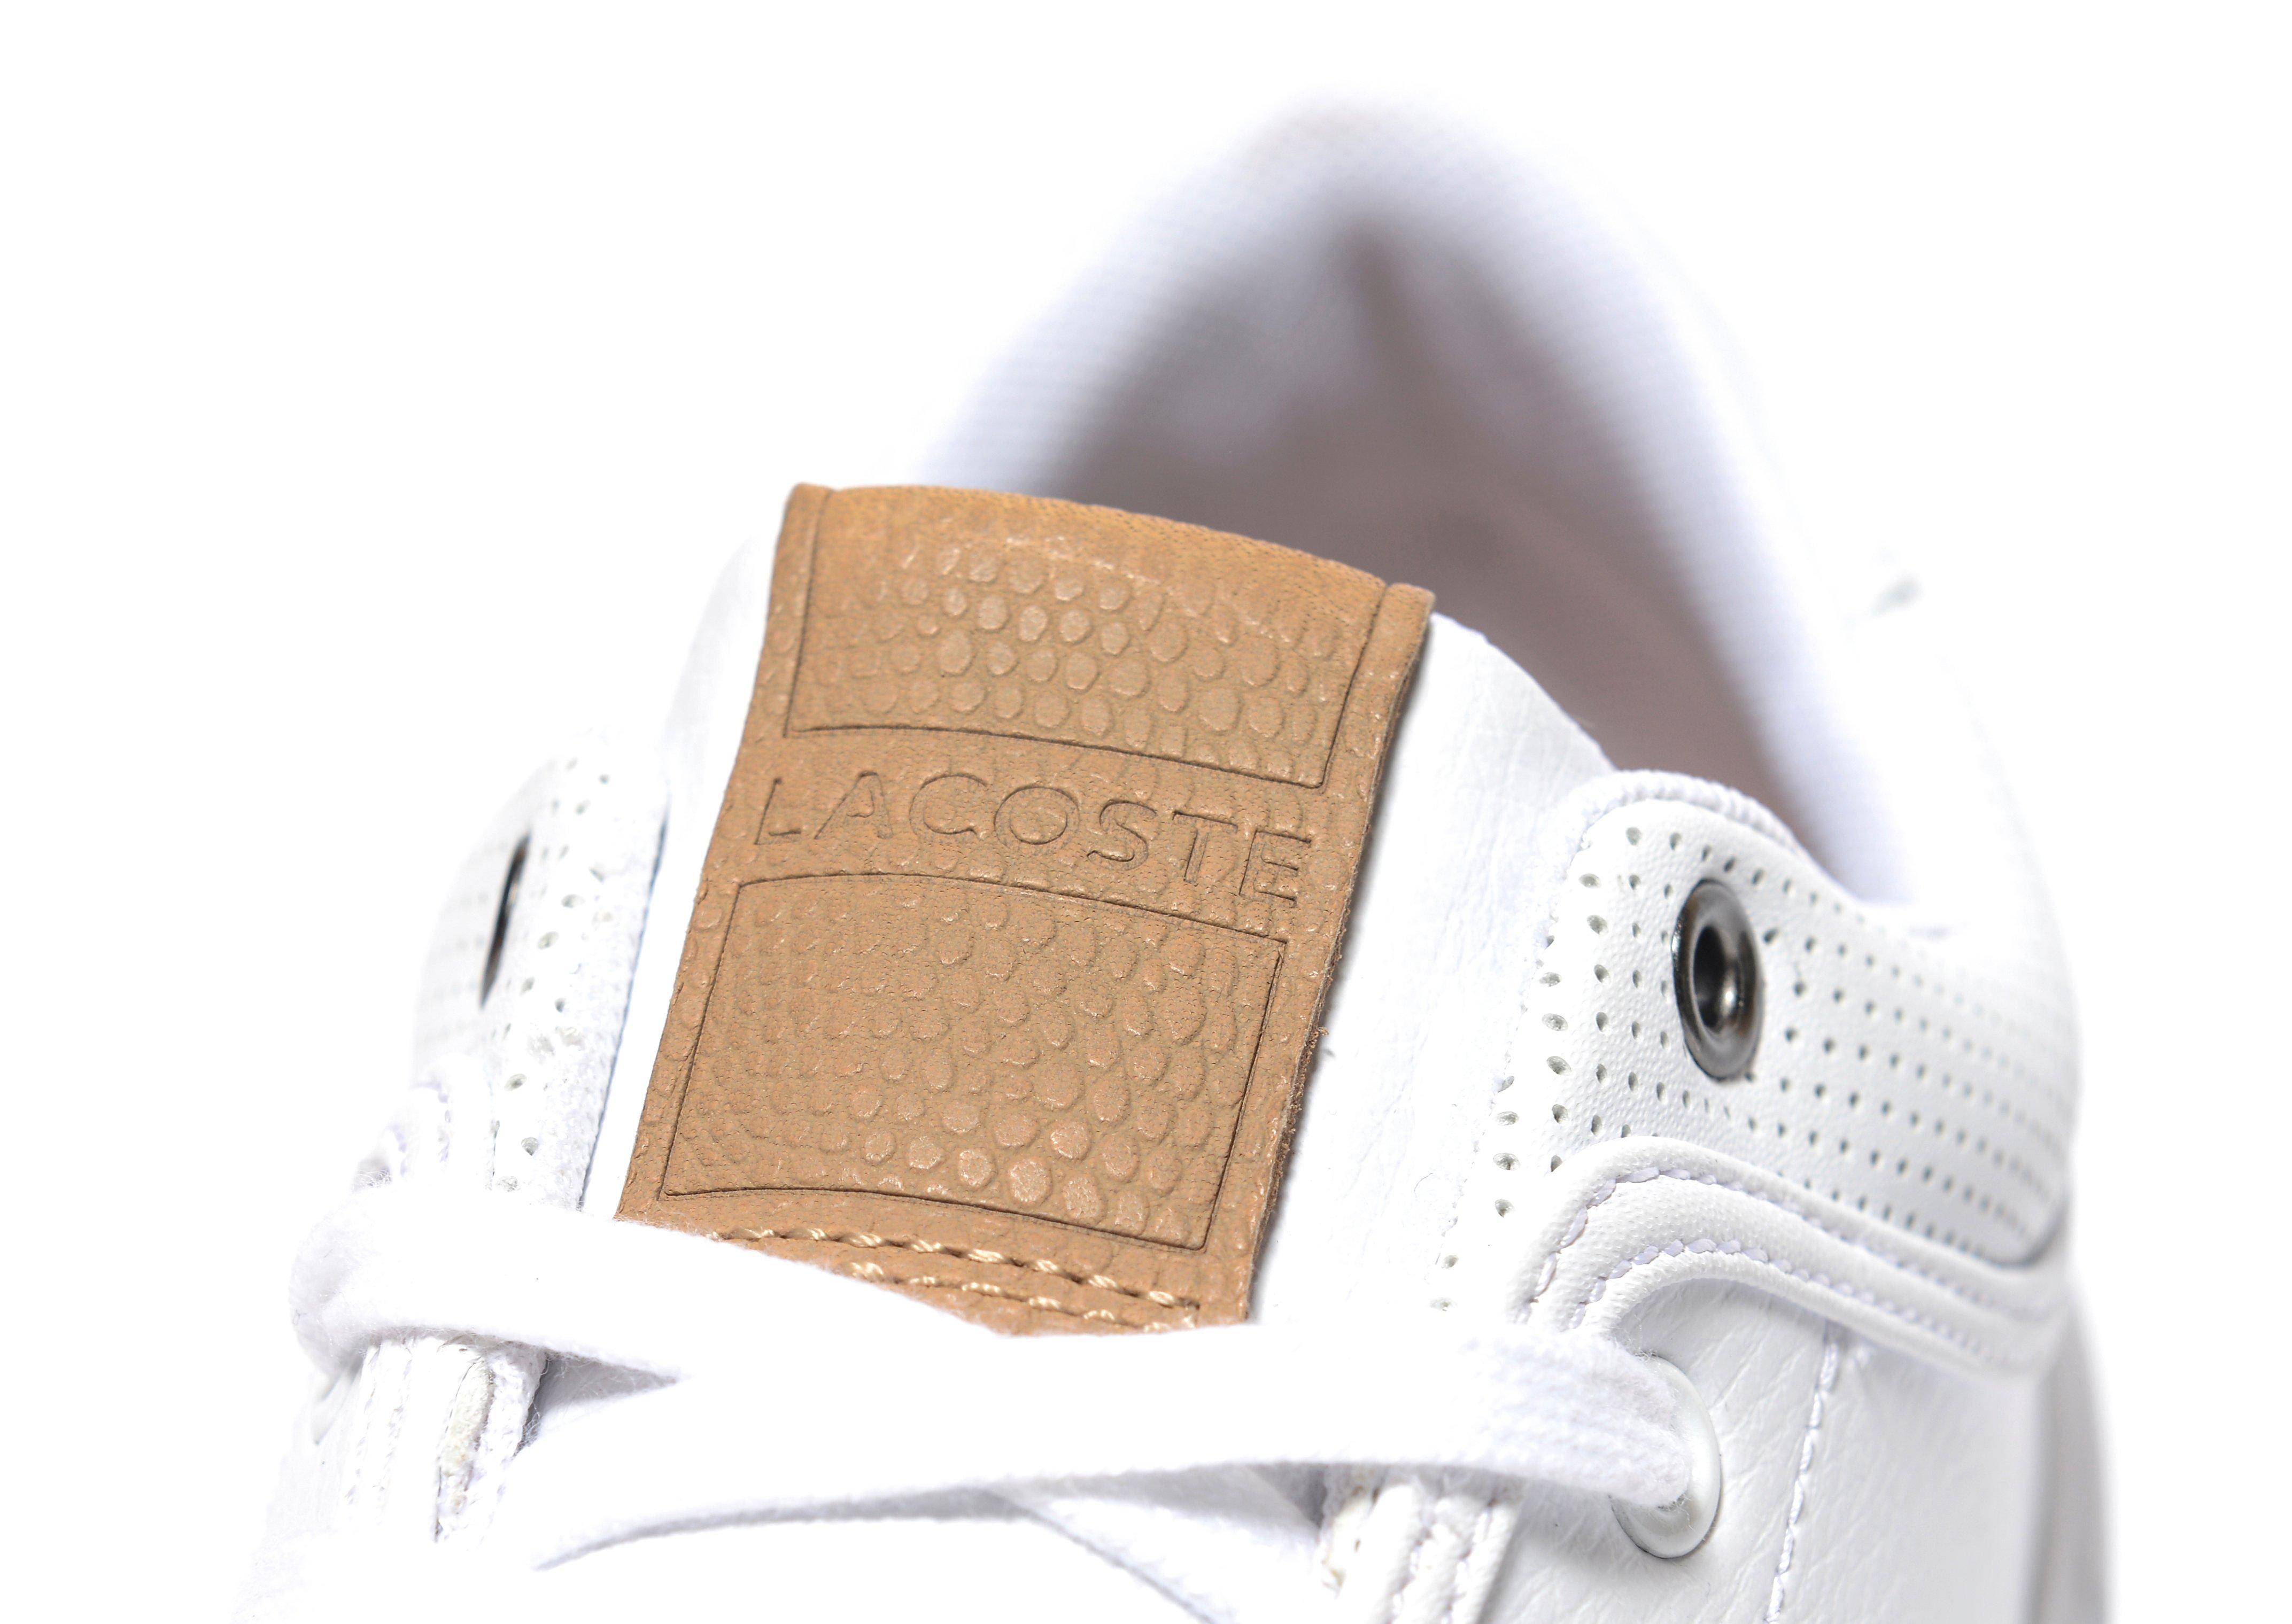 Lacoste Leather Angha 217 in White/Tan 